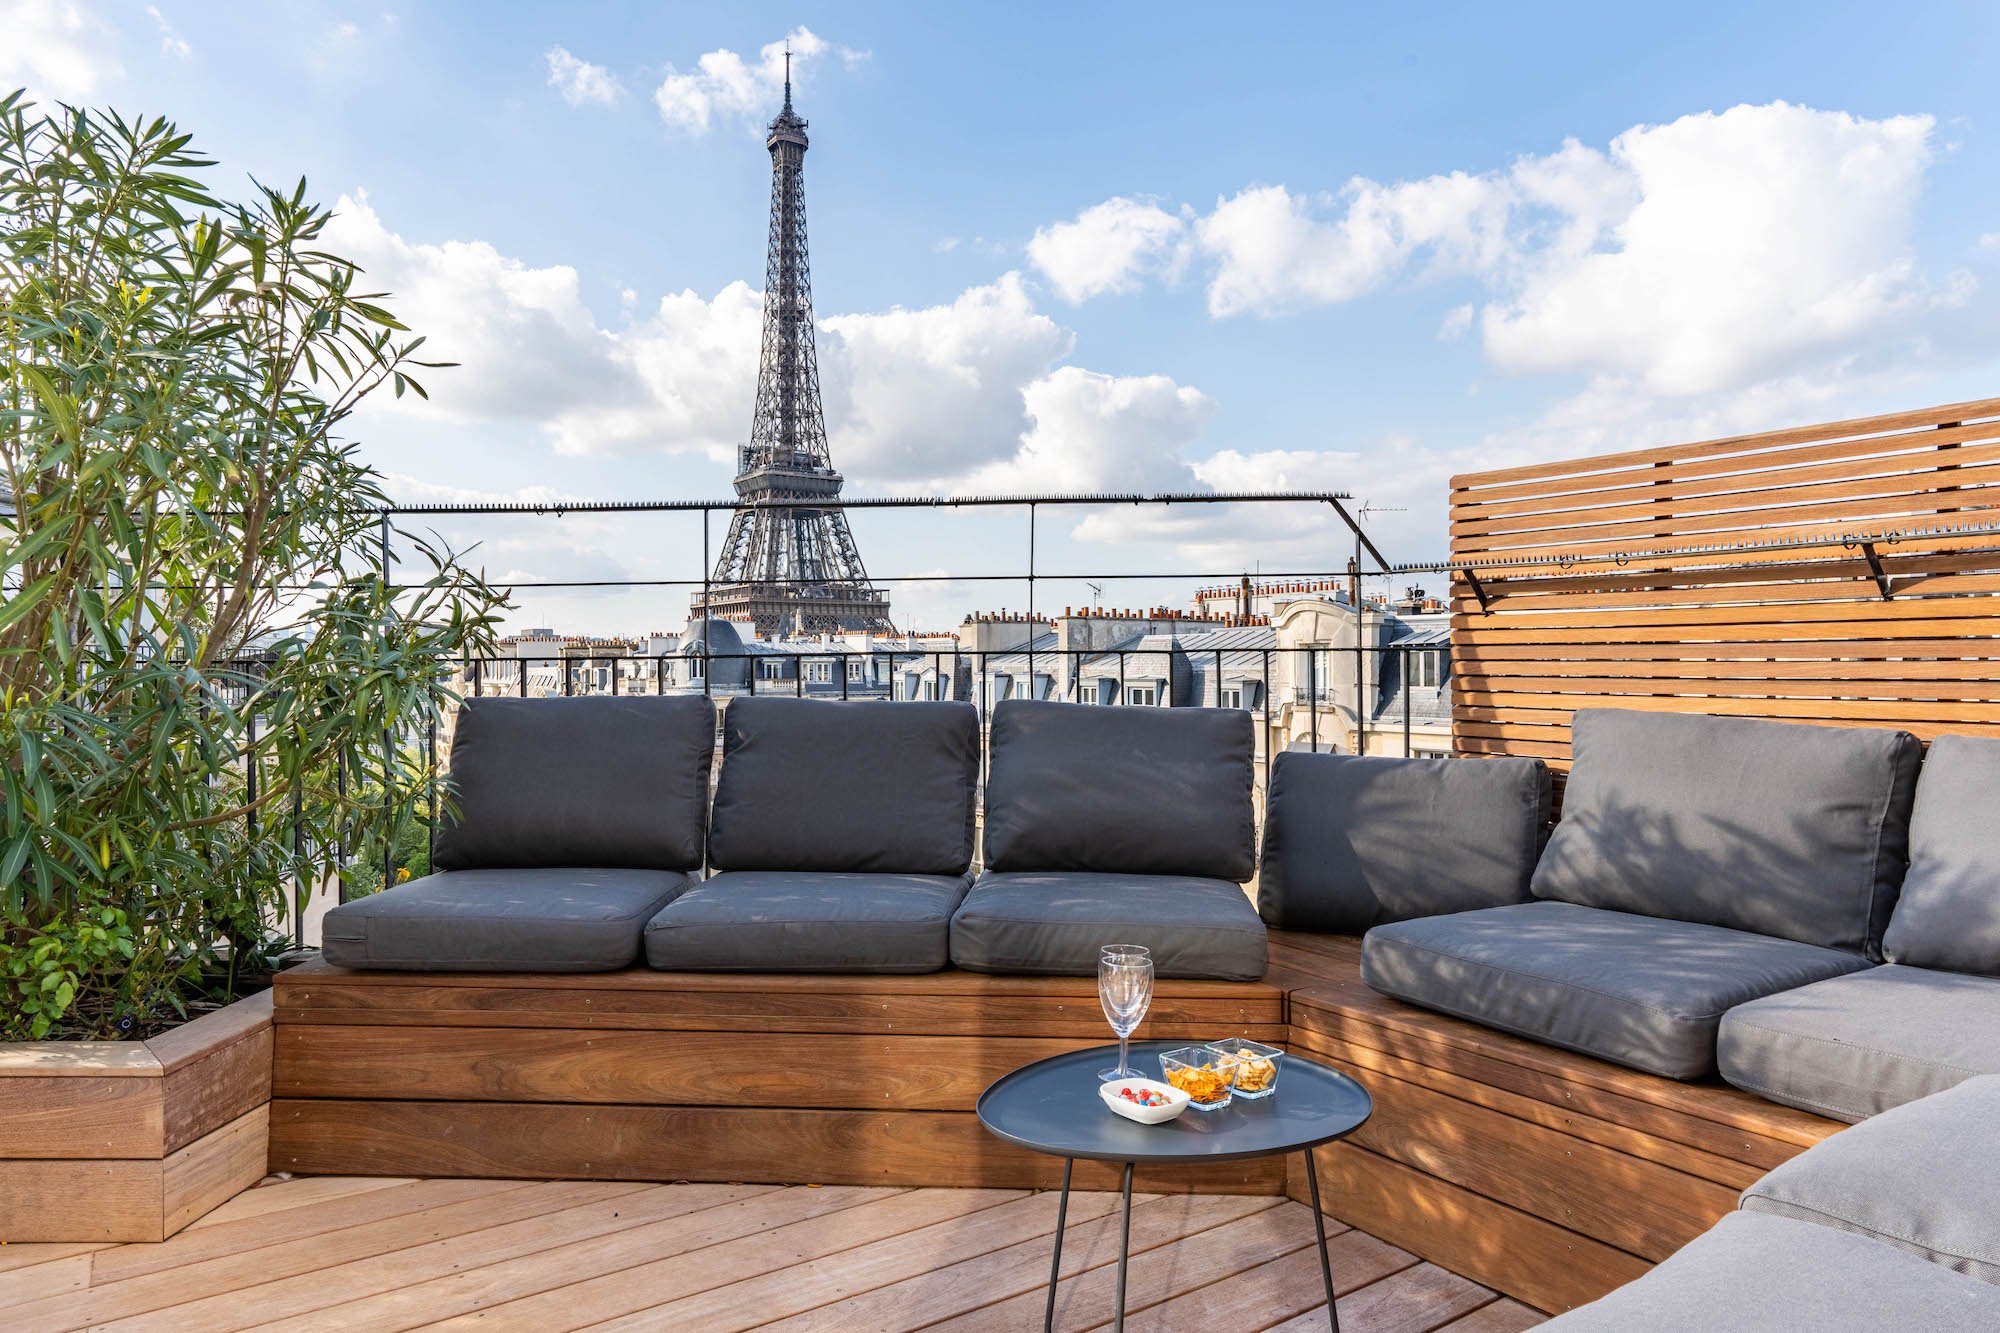 Exceptional apartment with Eiffel Tower view and rooftop